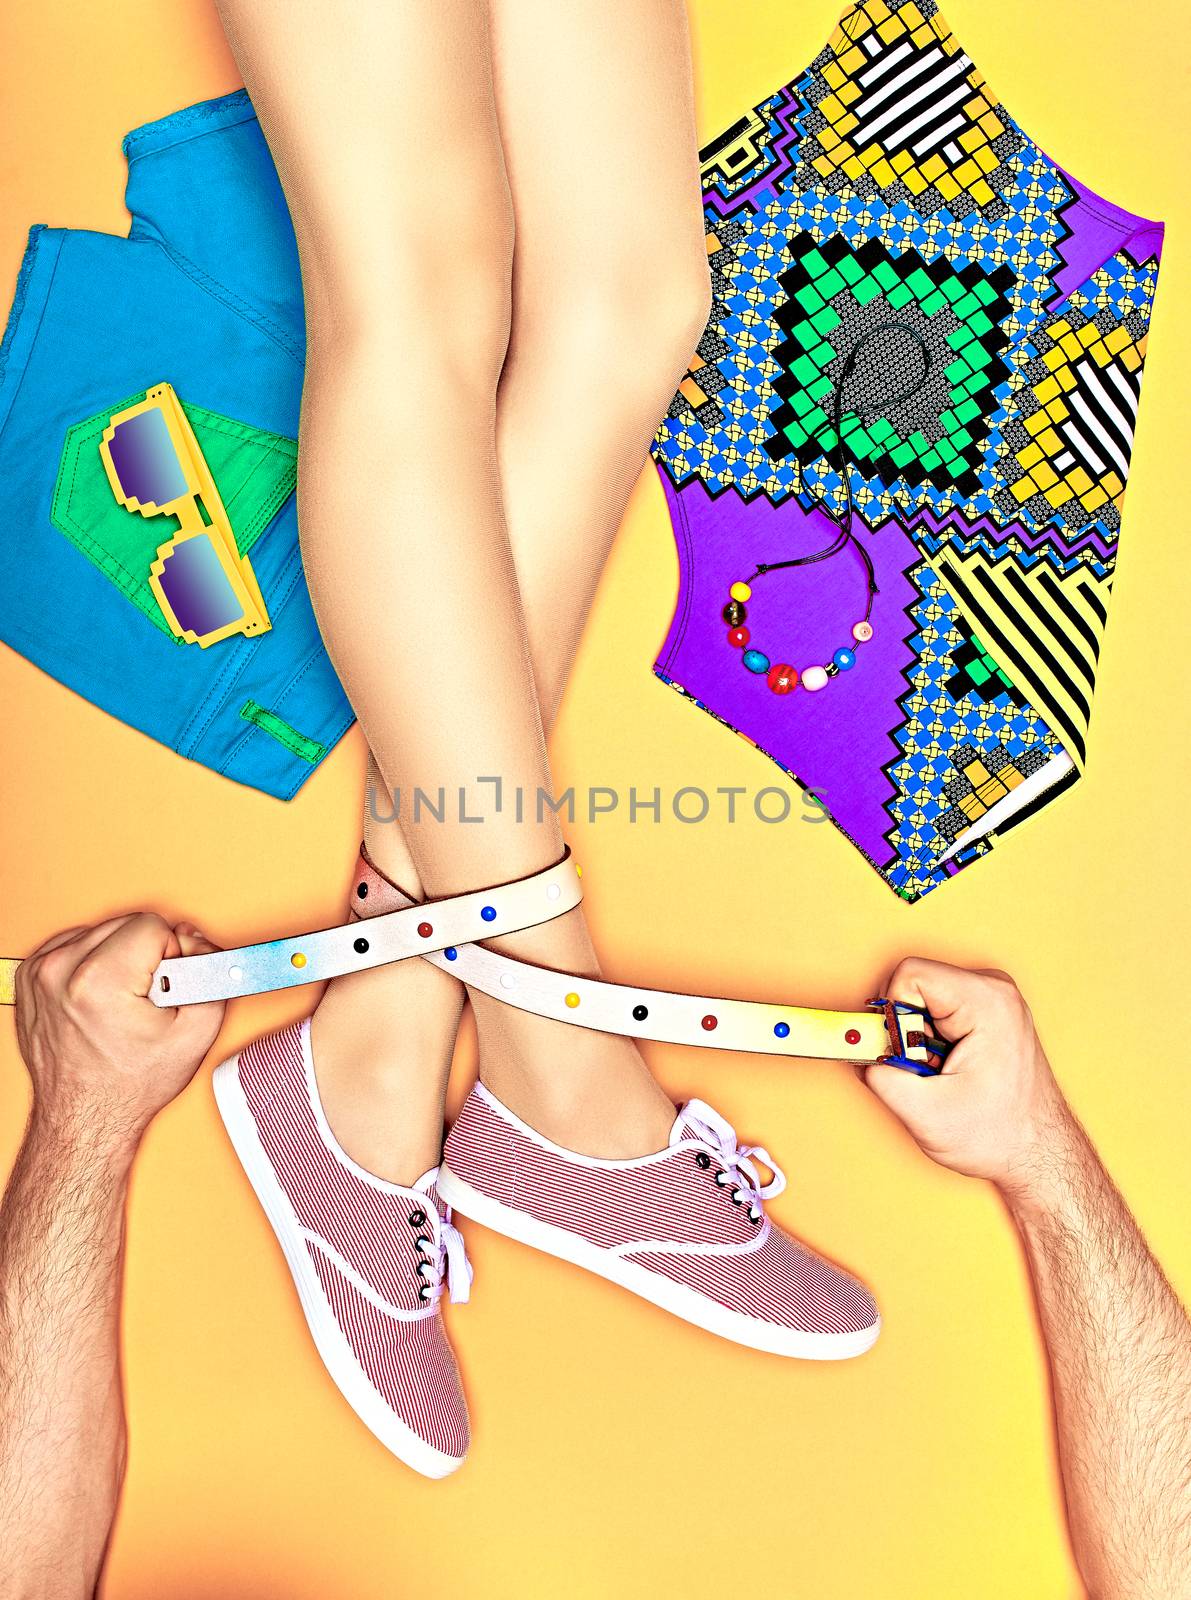 Fashion clothes stylish set, accessories, womans sexy legs, people. Hipster girl creative look in trendy gumshoes, top, shorts, sunglasses. Mans hands holding belt. Vivid youth style, yellow,copyspace